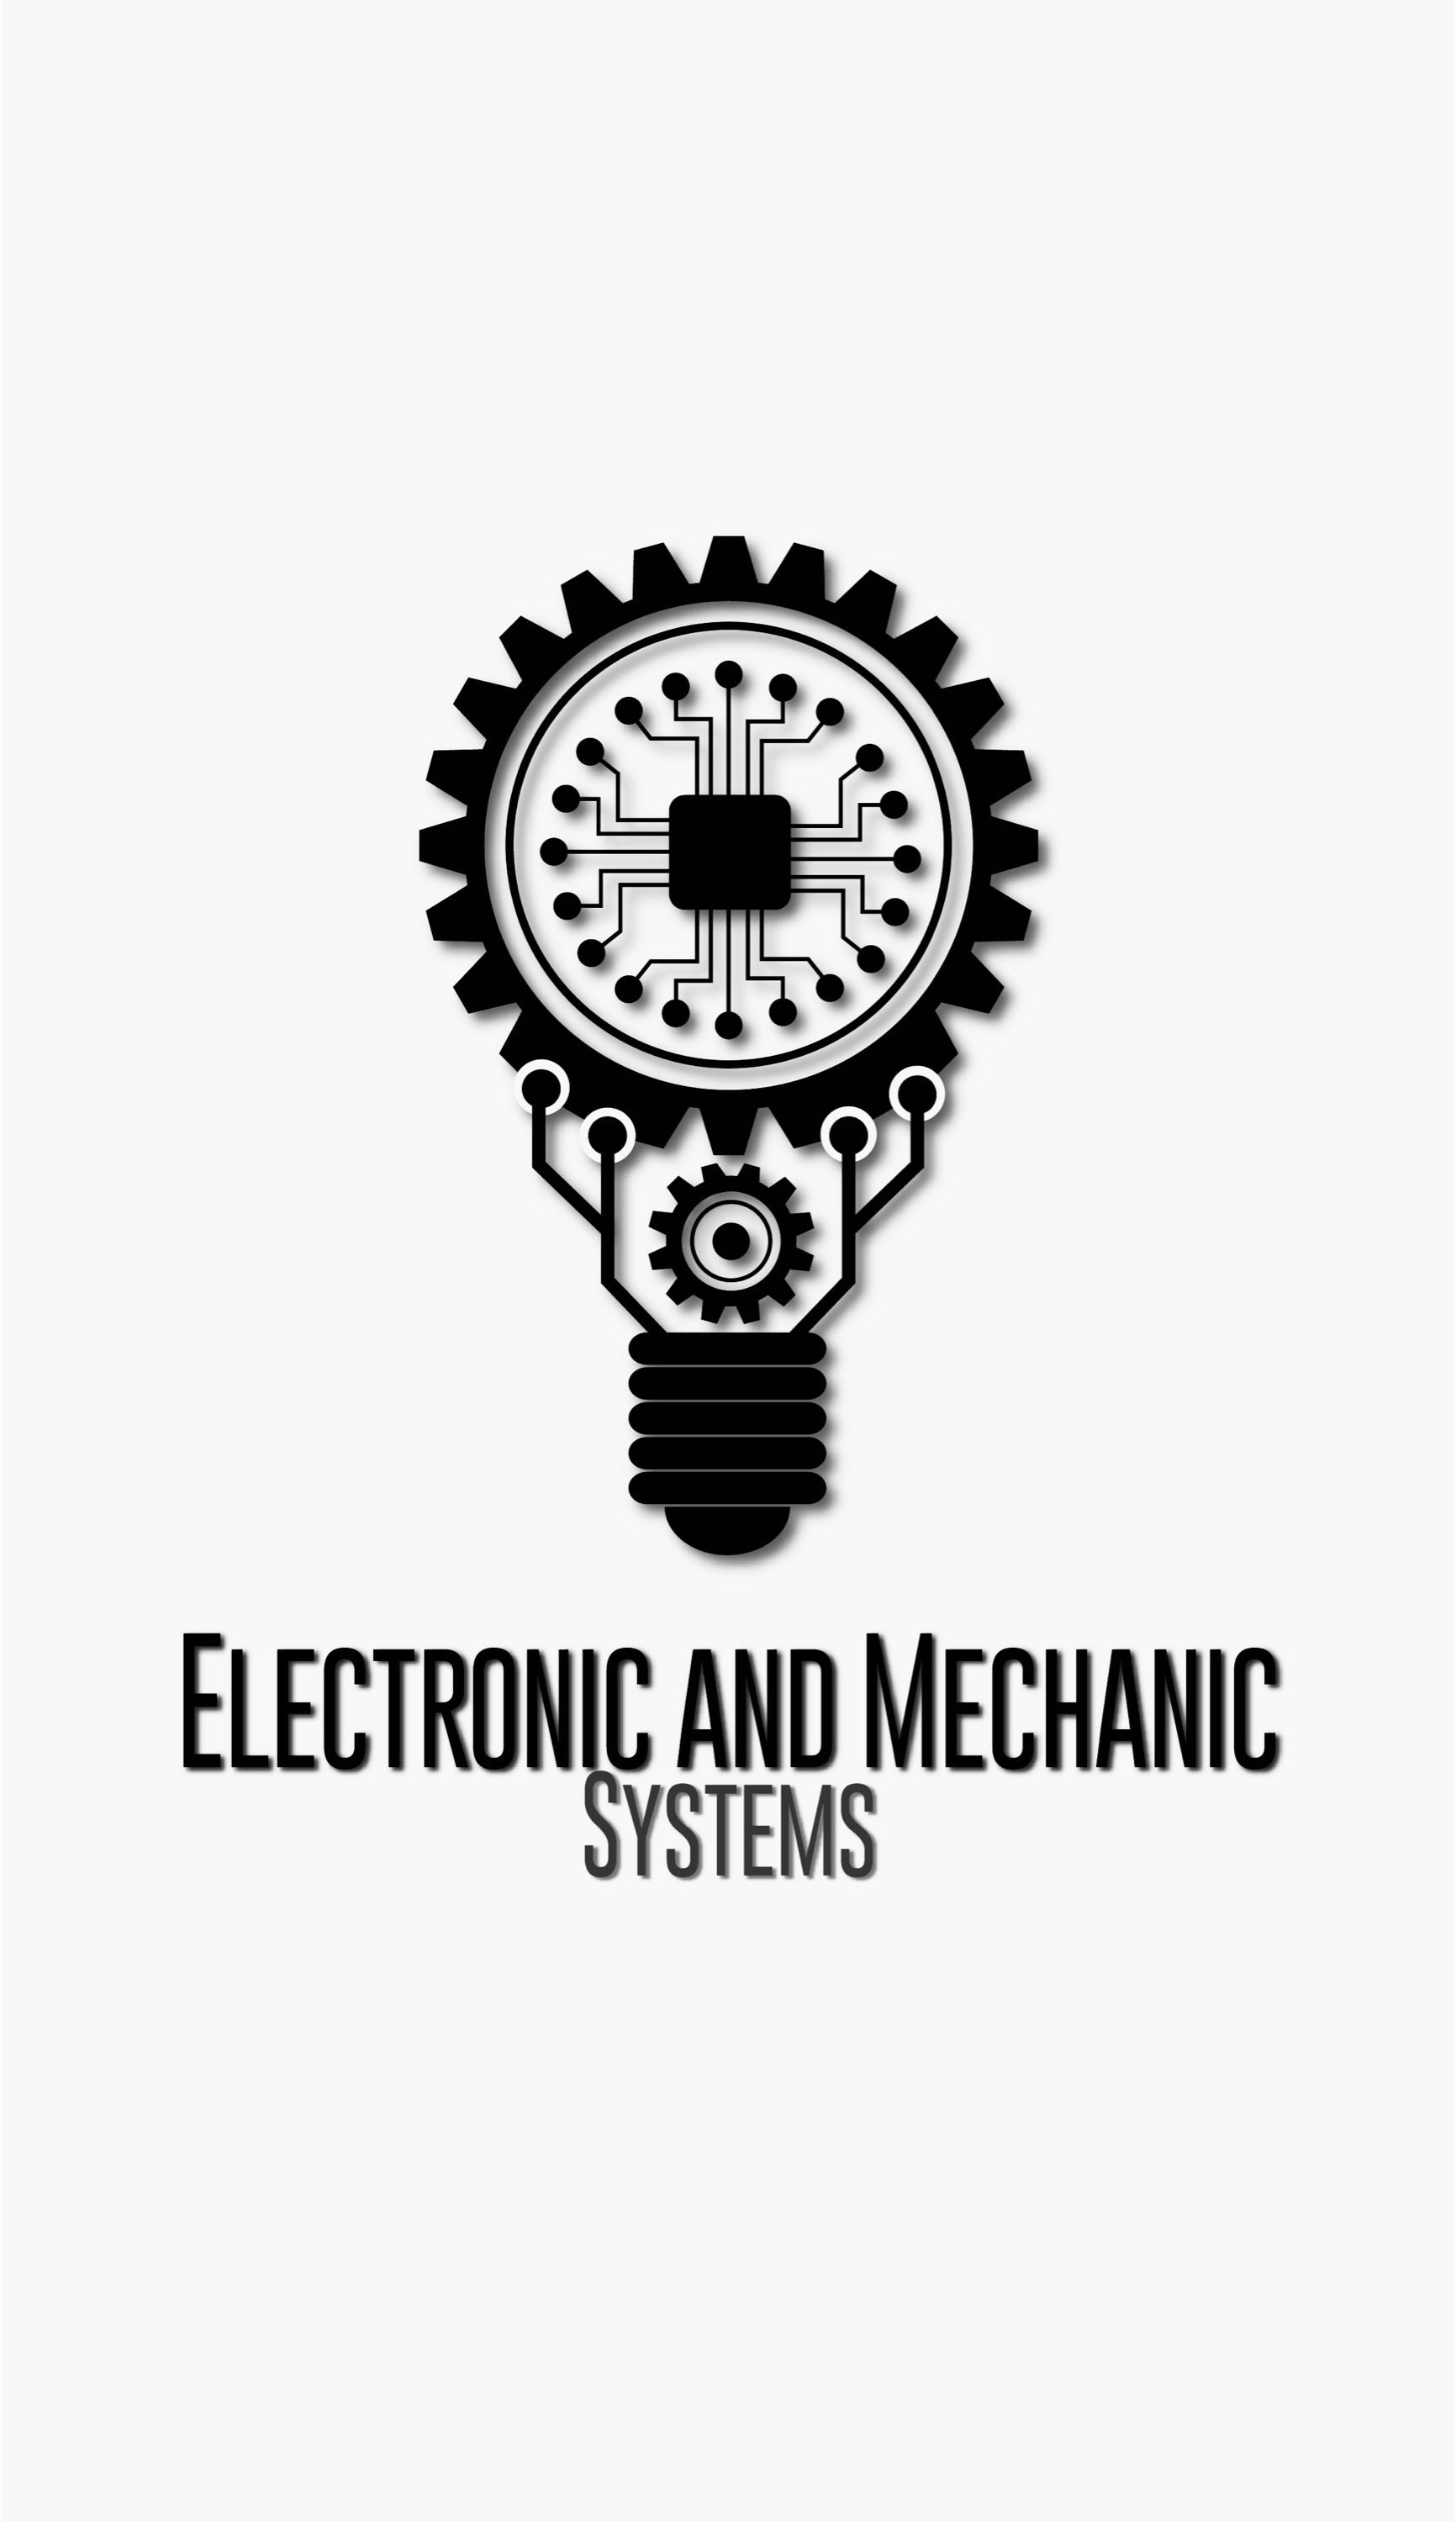 Electronic and Mechanic Systems Service Logo